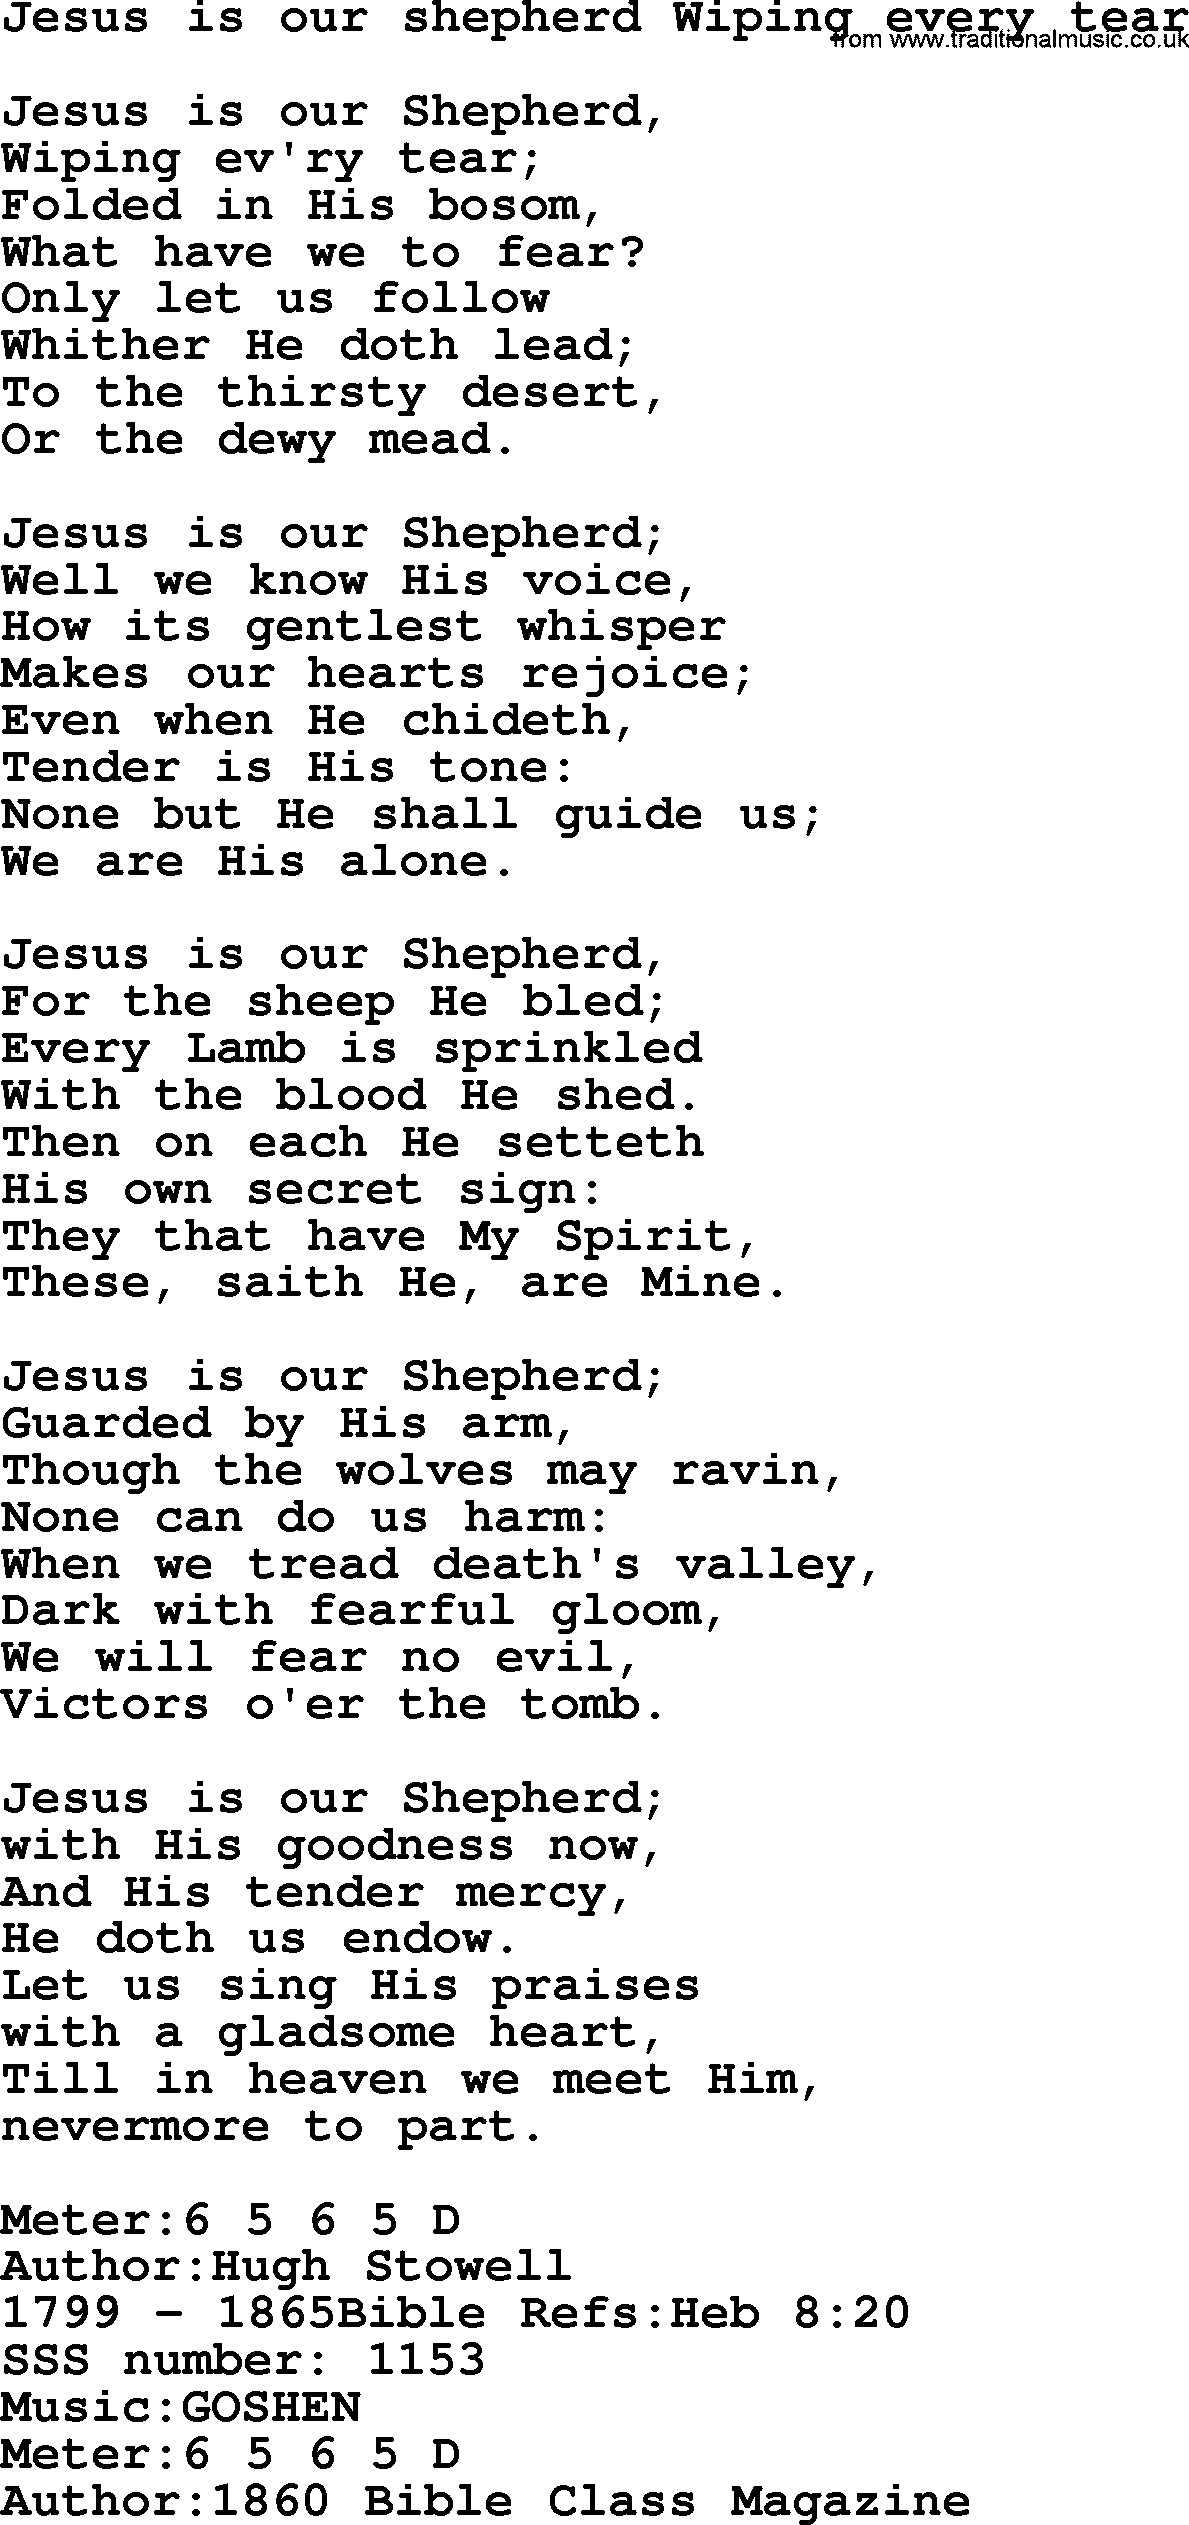 Sacred Songs and Solos complete, 1200 Hymns, title: Jesus Is Our Shepherd Wiping Every Tear, lyrics and PDF